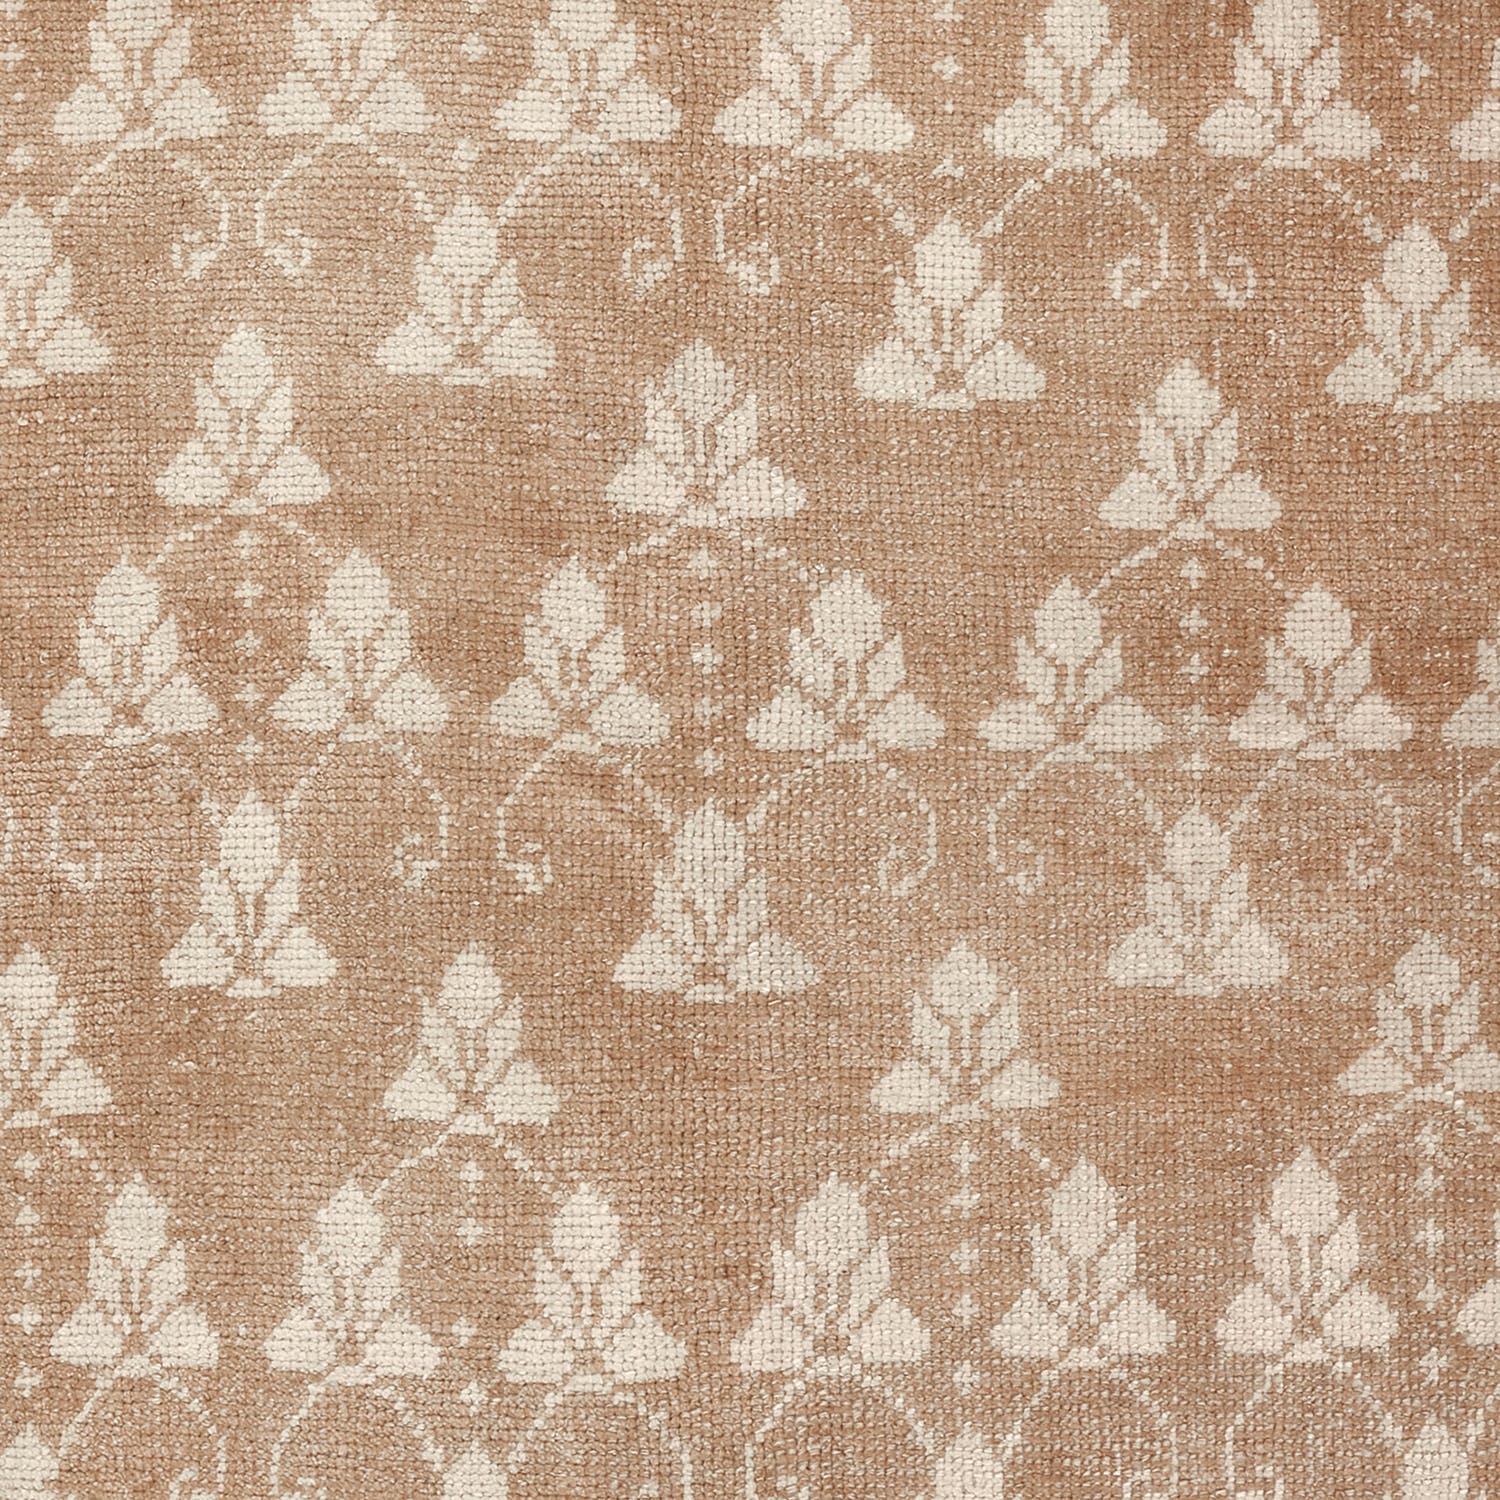 Close-up of floral patterned fabric with a subdued color scheme.